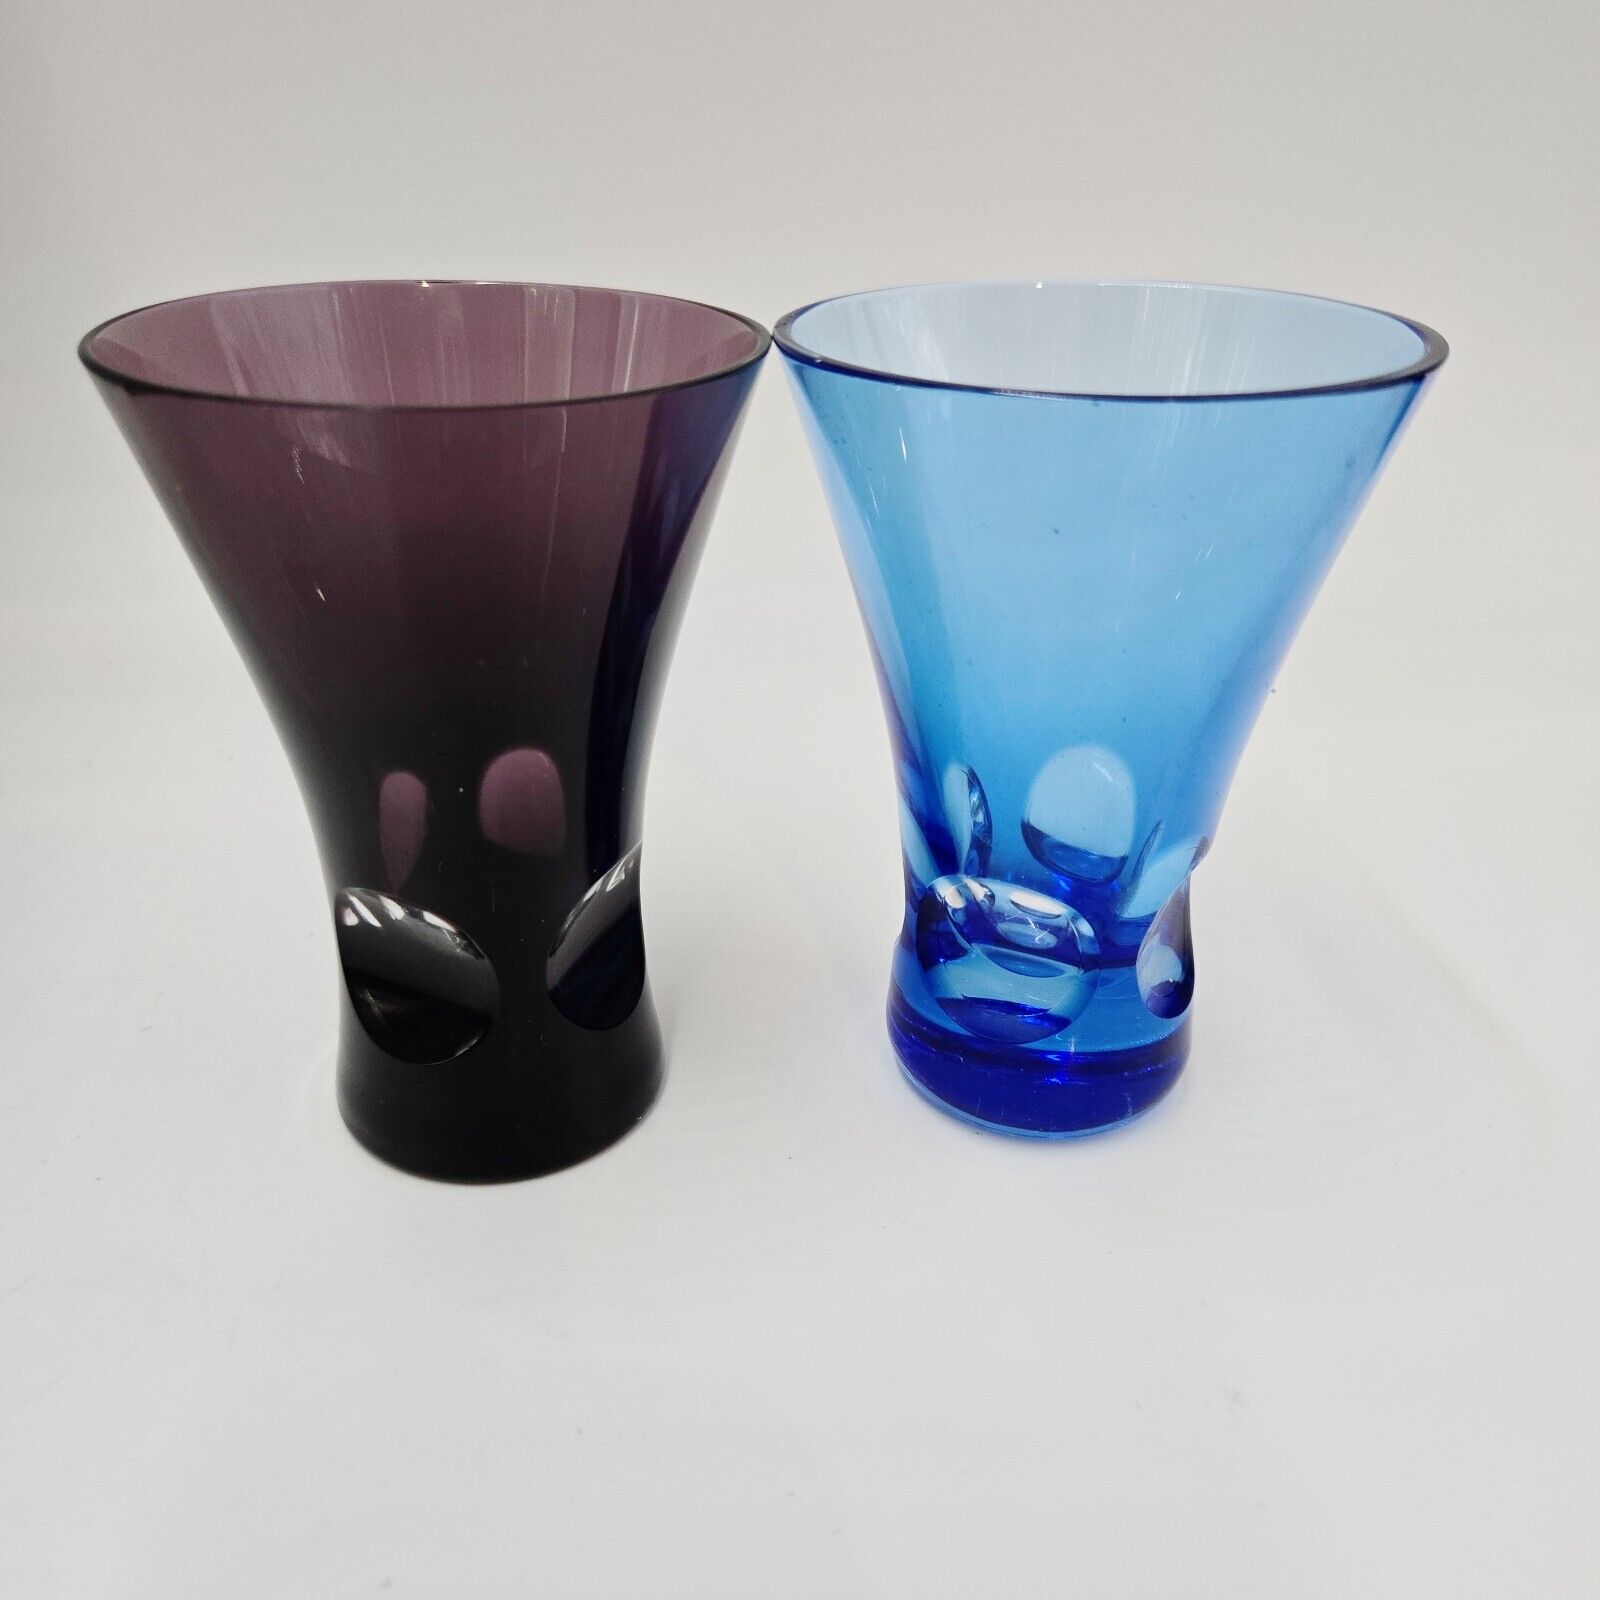 Rare Movado Drinking Cocktail Cut Glass Hand Made In Hungary Set 2 Purple Blue